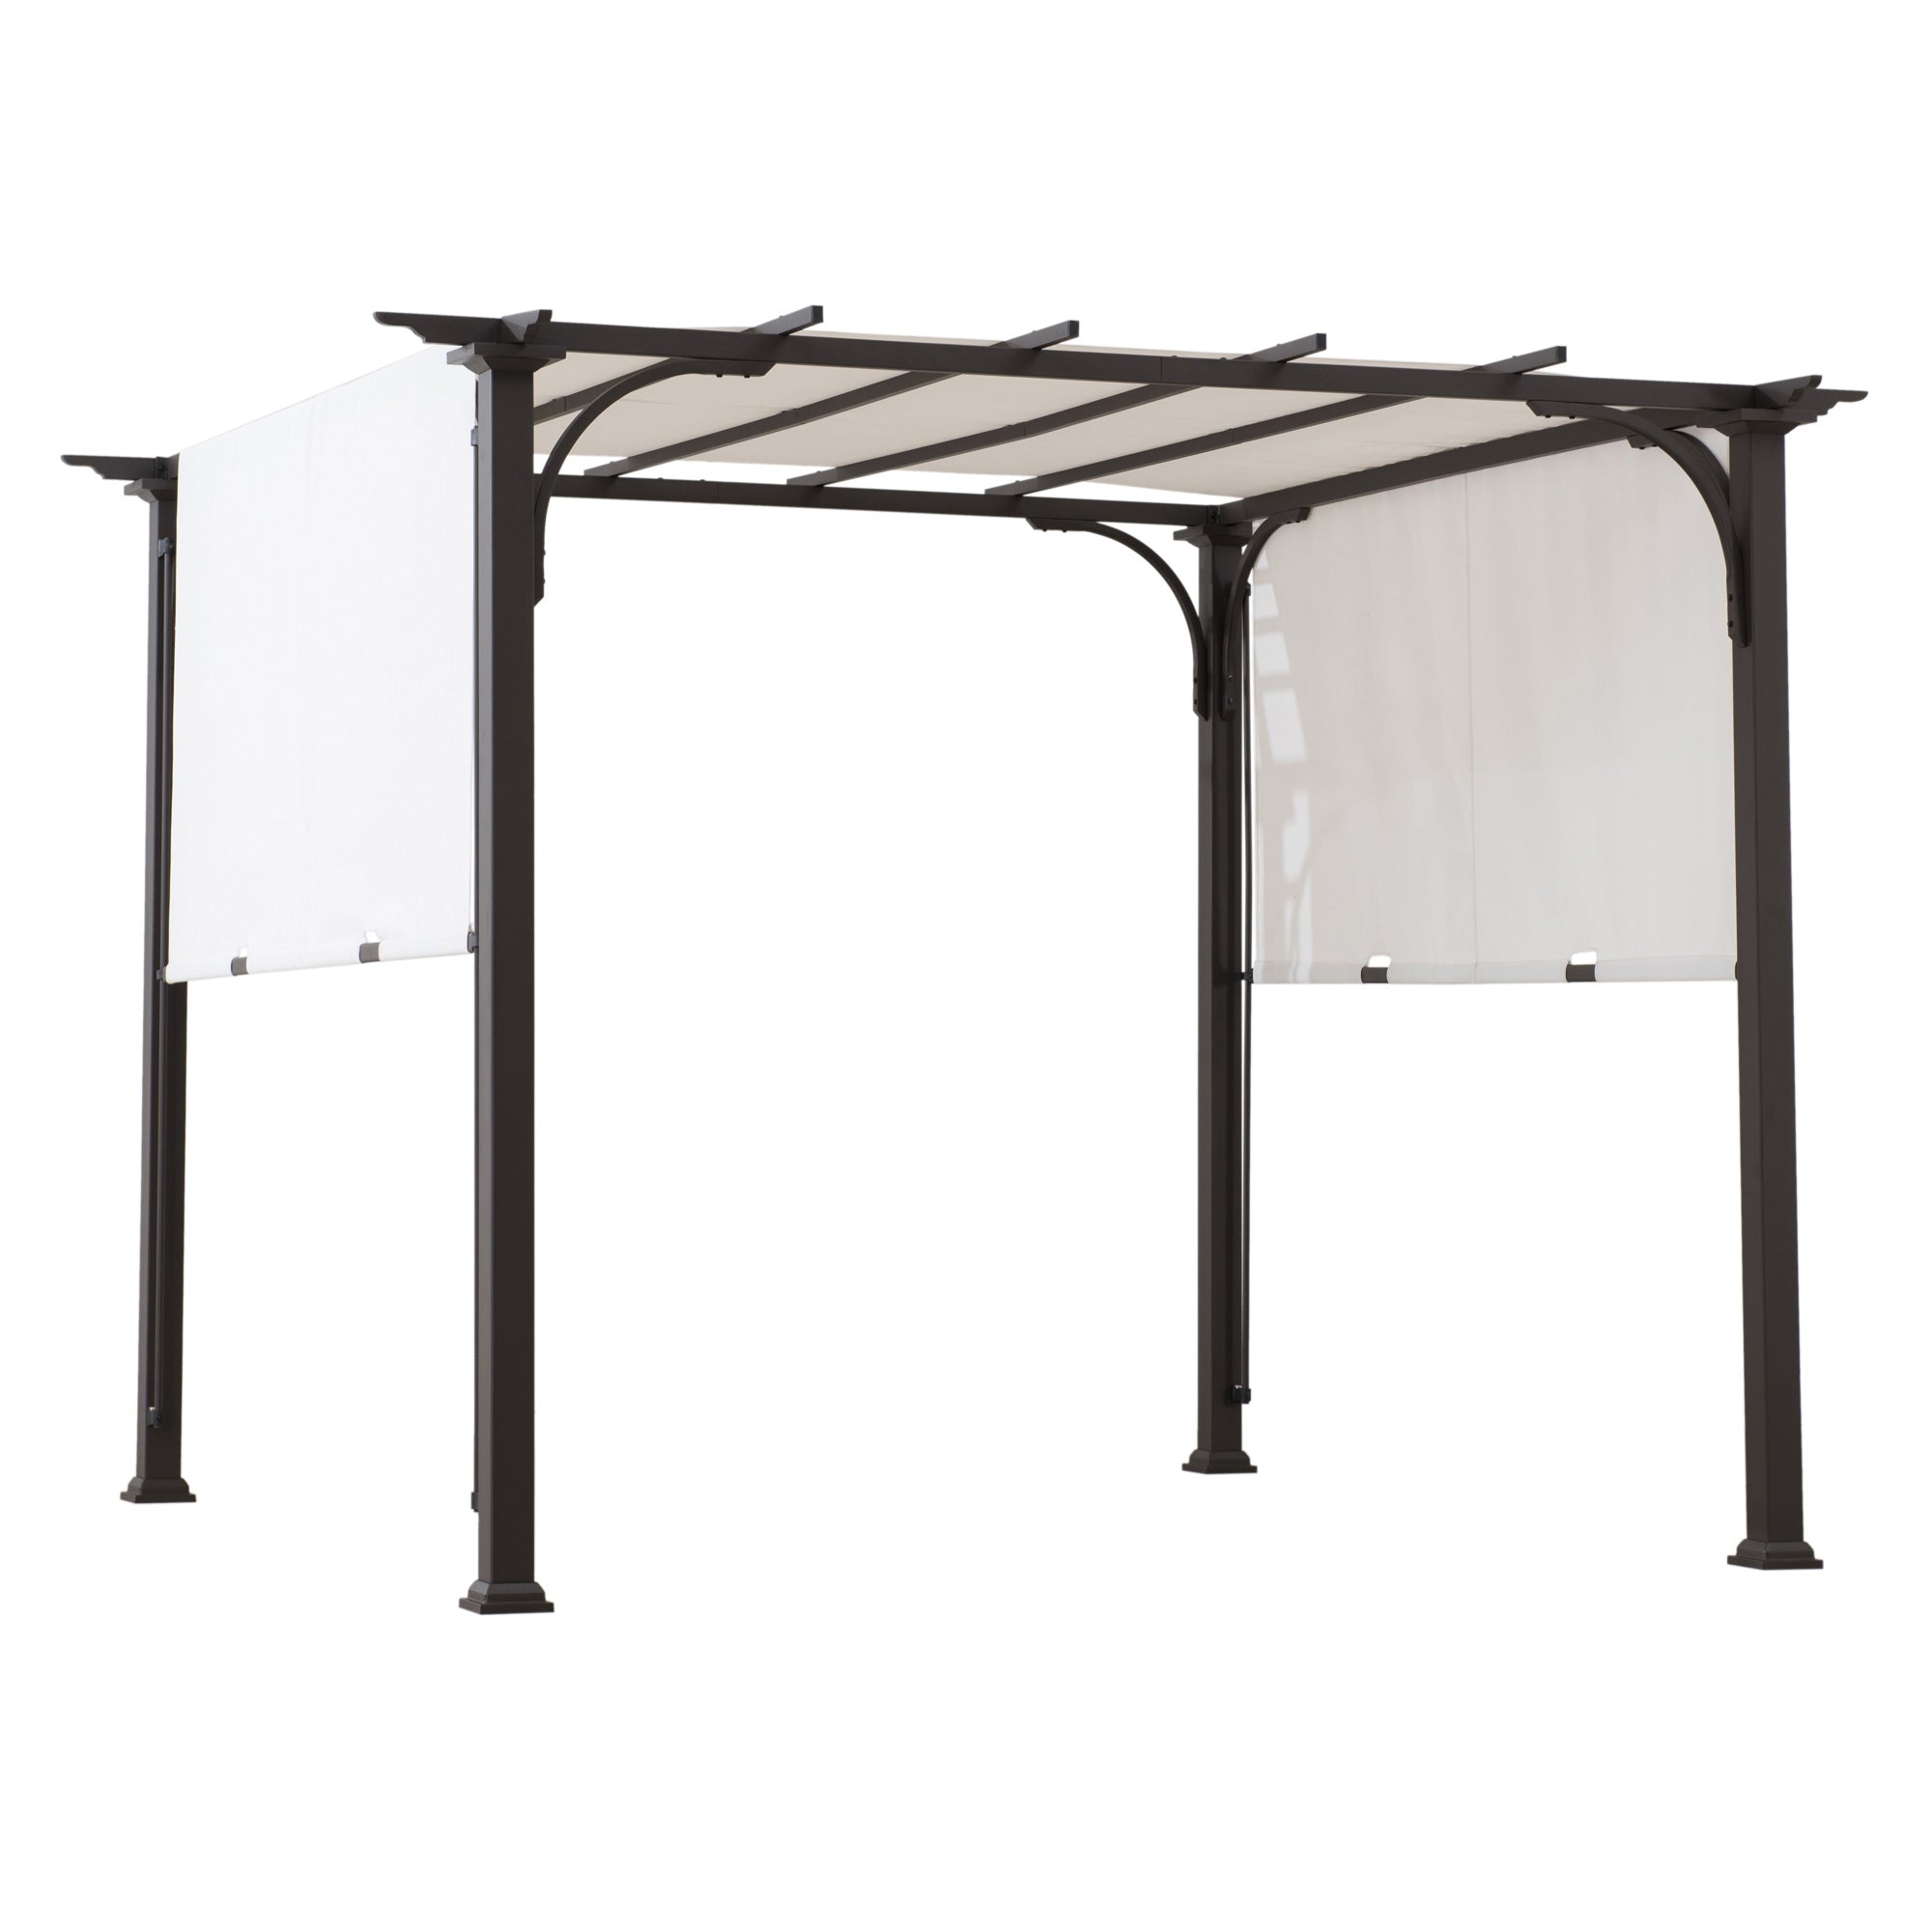 Sunjoy Beige Replacement Canopy For RetracTable Shade Pergola (9.5x9.5 Ft) A106005510 Sold At SunNest.